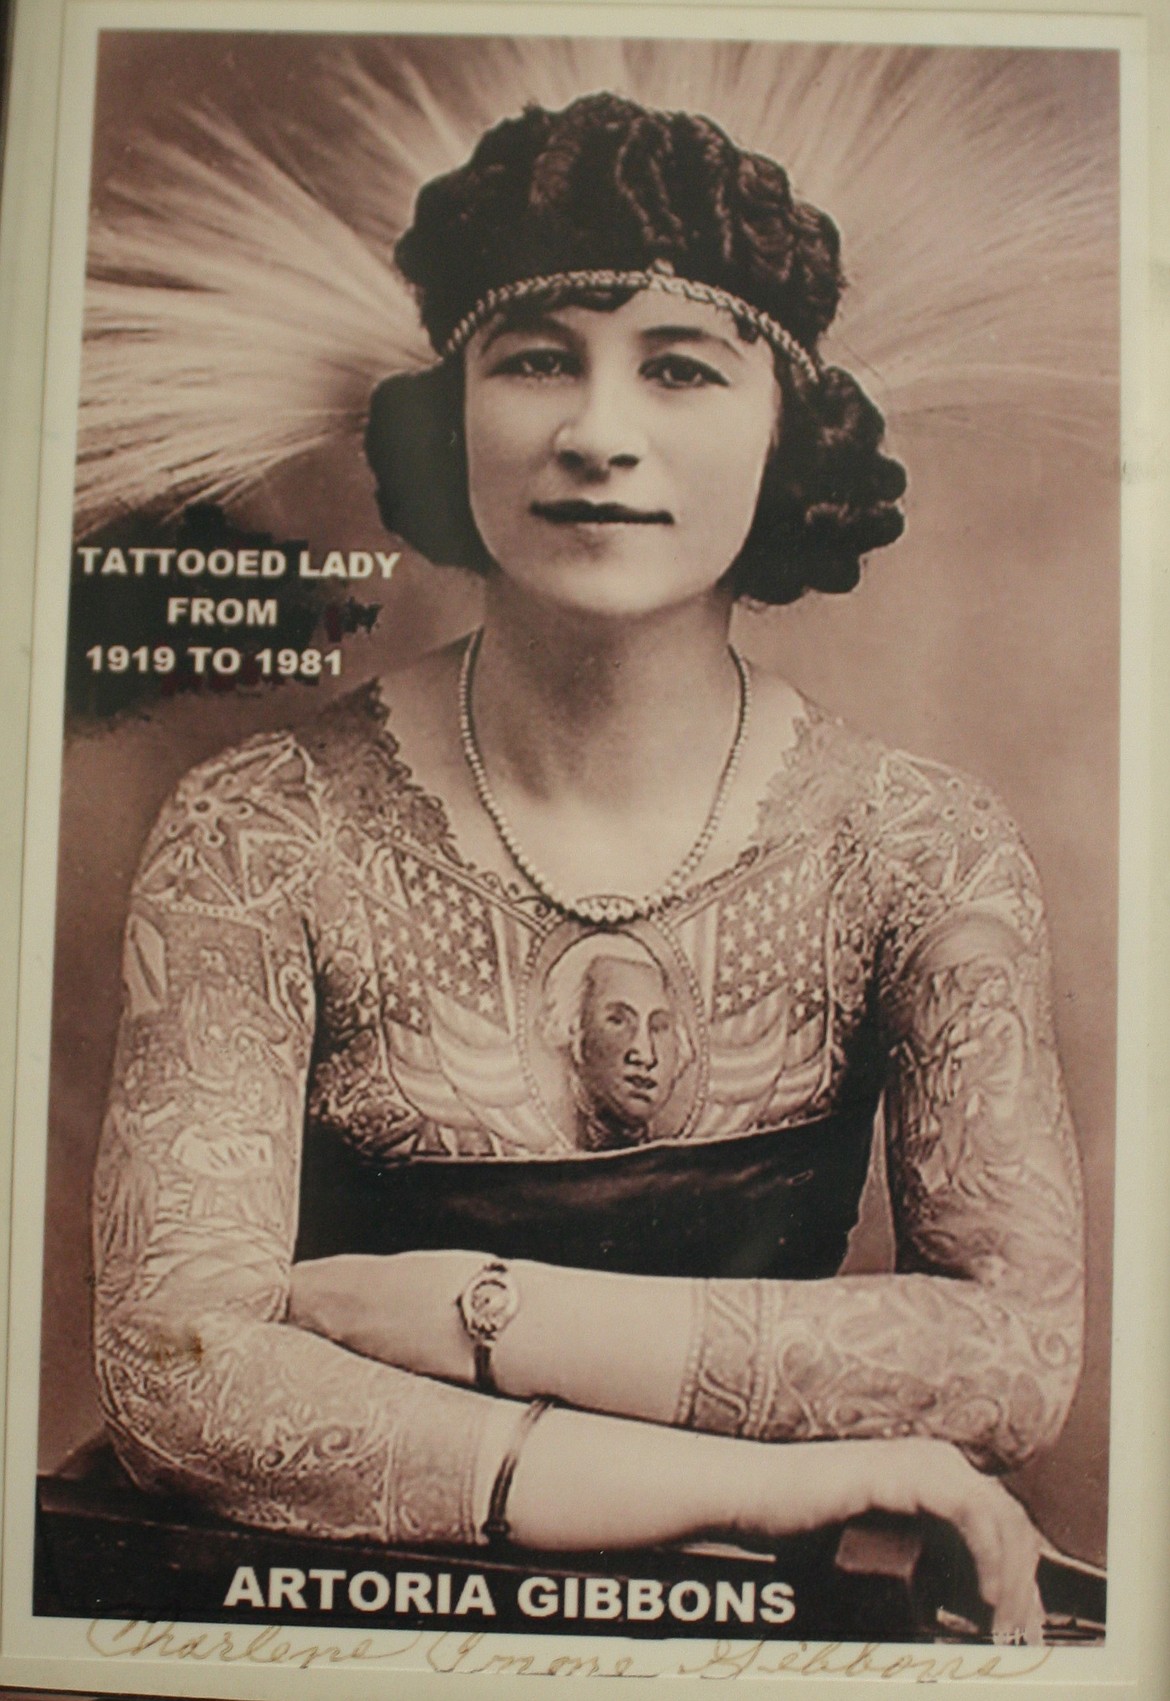 Photo of Artoria Gibbons, famous tattooed lady and tattooist from the 20th century, featured in the museum.